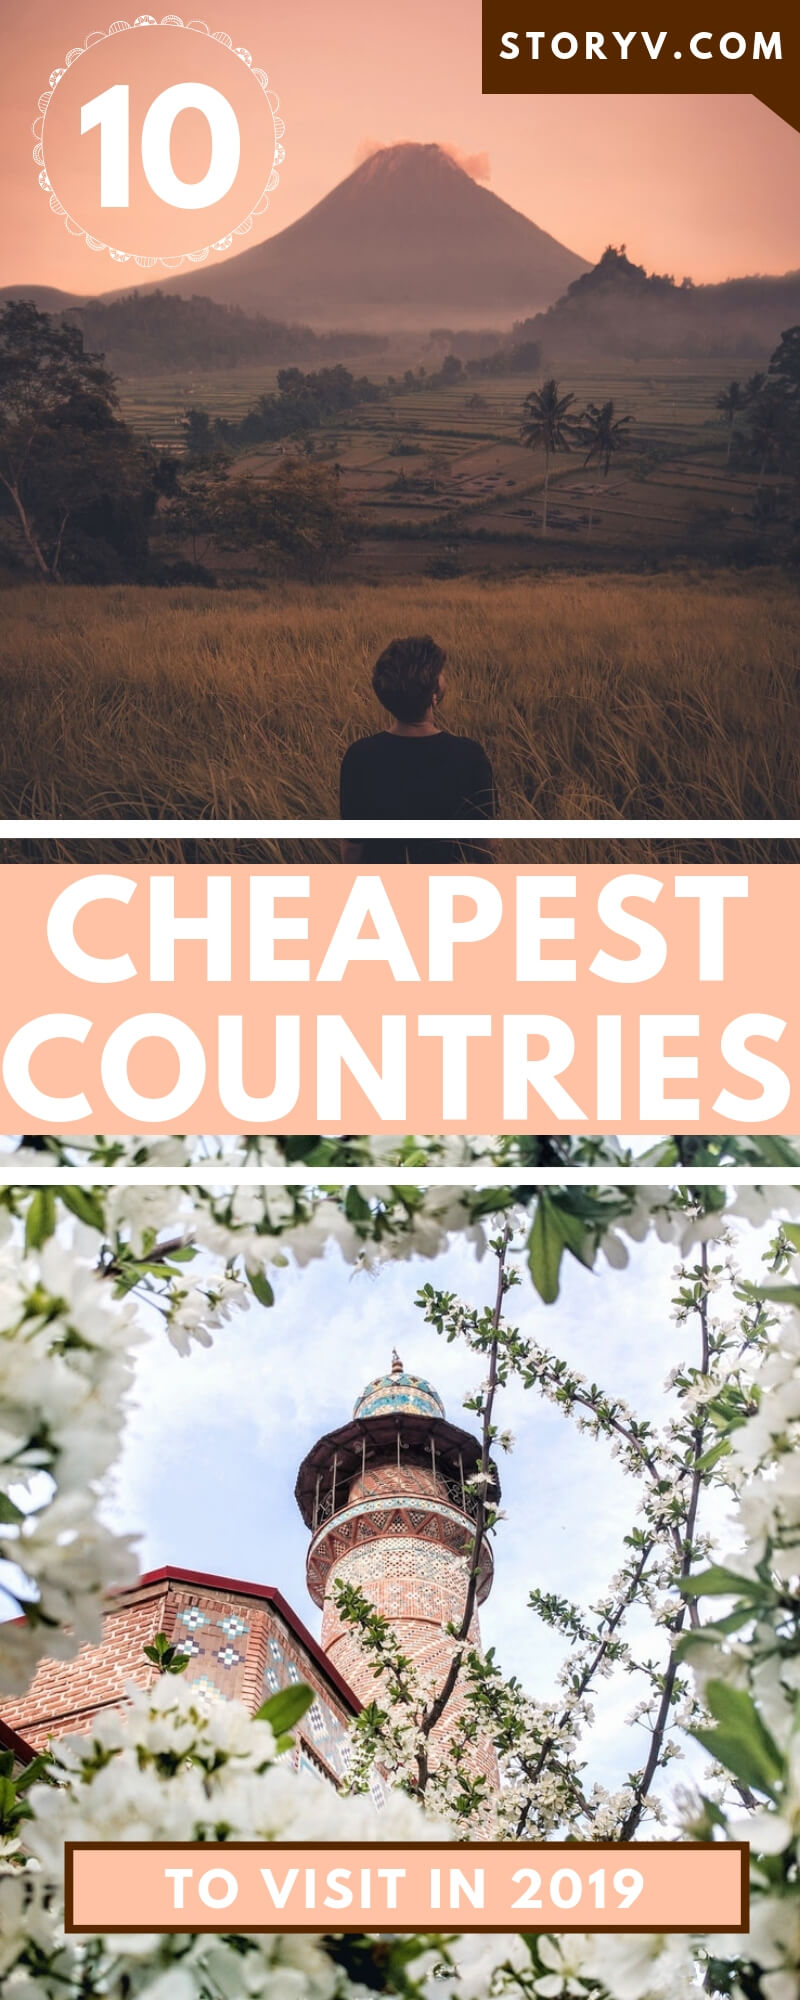 Don't break the bank, break open the bubbly because you're about to live out your wildest travel dreams! Read on to discover which of the cheapest travel destinations should be on your bucket list in 2019...